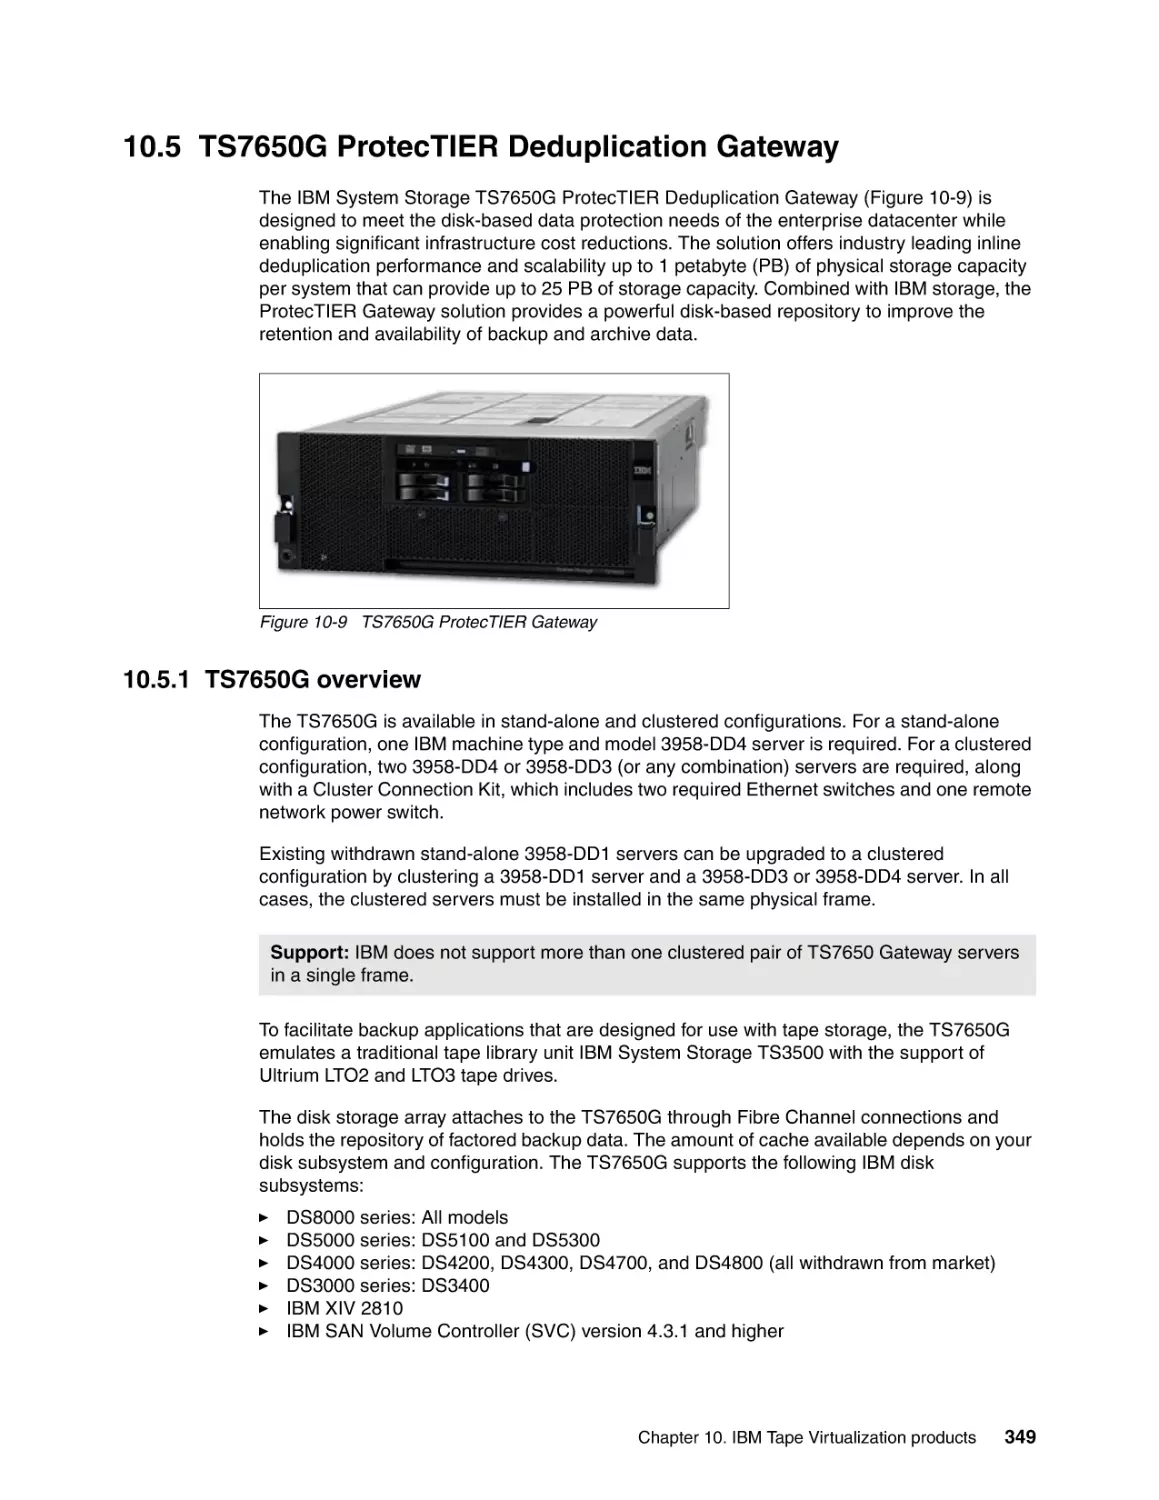 10.5 TS7650G ProtecTIER Deduplication Gateway
10.5.1 TS7650G overview